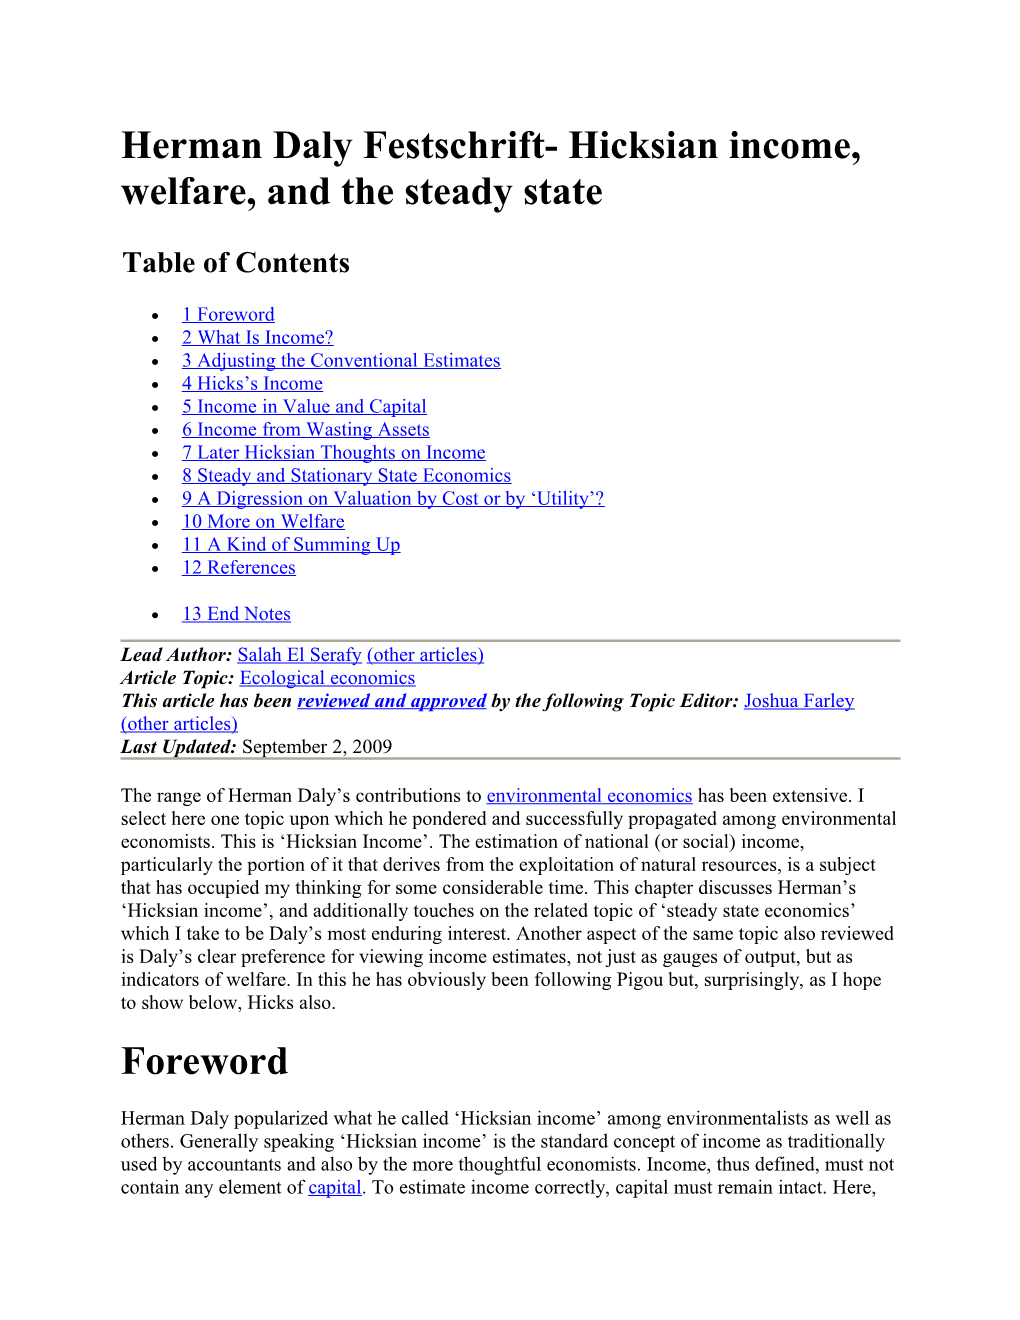 Herman Daly Festschrift- Hicksian Income, Welfare, and the Steady State